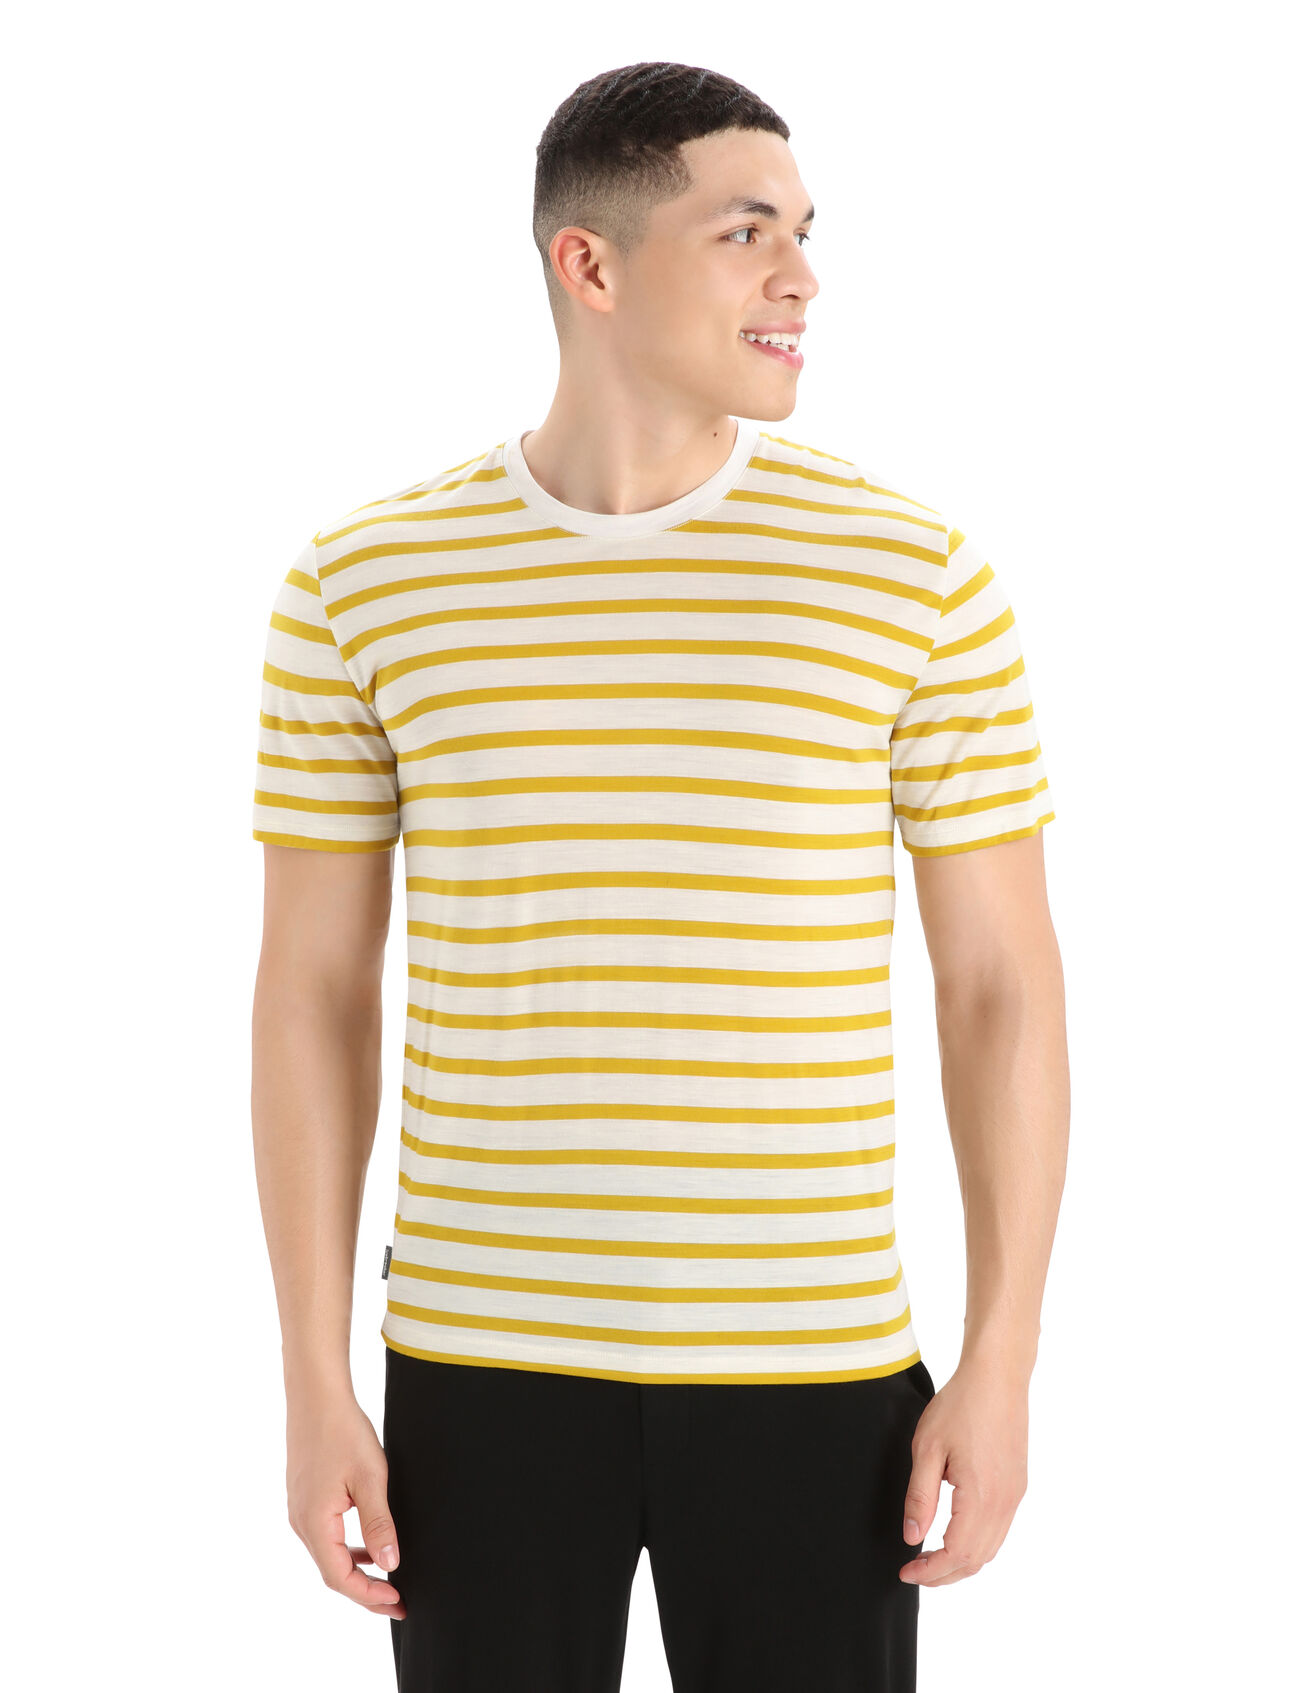 Mens Merino Drayden Short Sleeve T-Shirt Stripe A classic, stylish tee with everyday versatility and incredible breathability, the Drayden Short Sleeve Tee Stripe features our moisture-managing Cool-Lite™ merino jersey fabric.